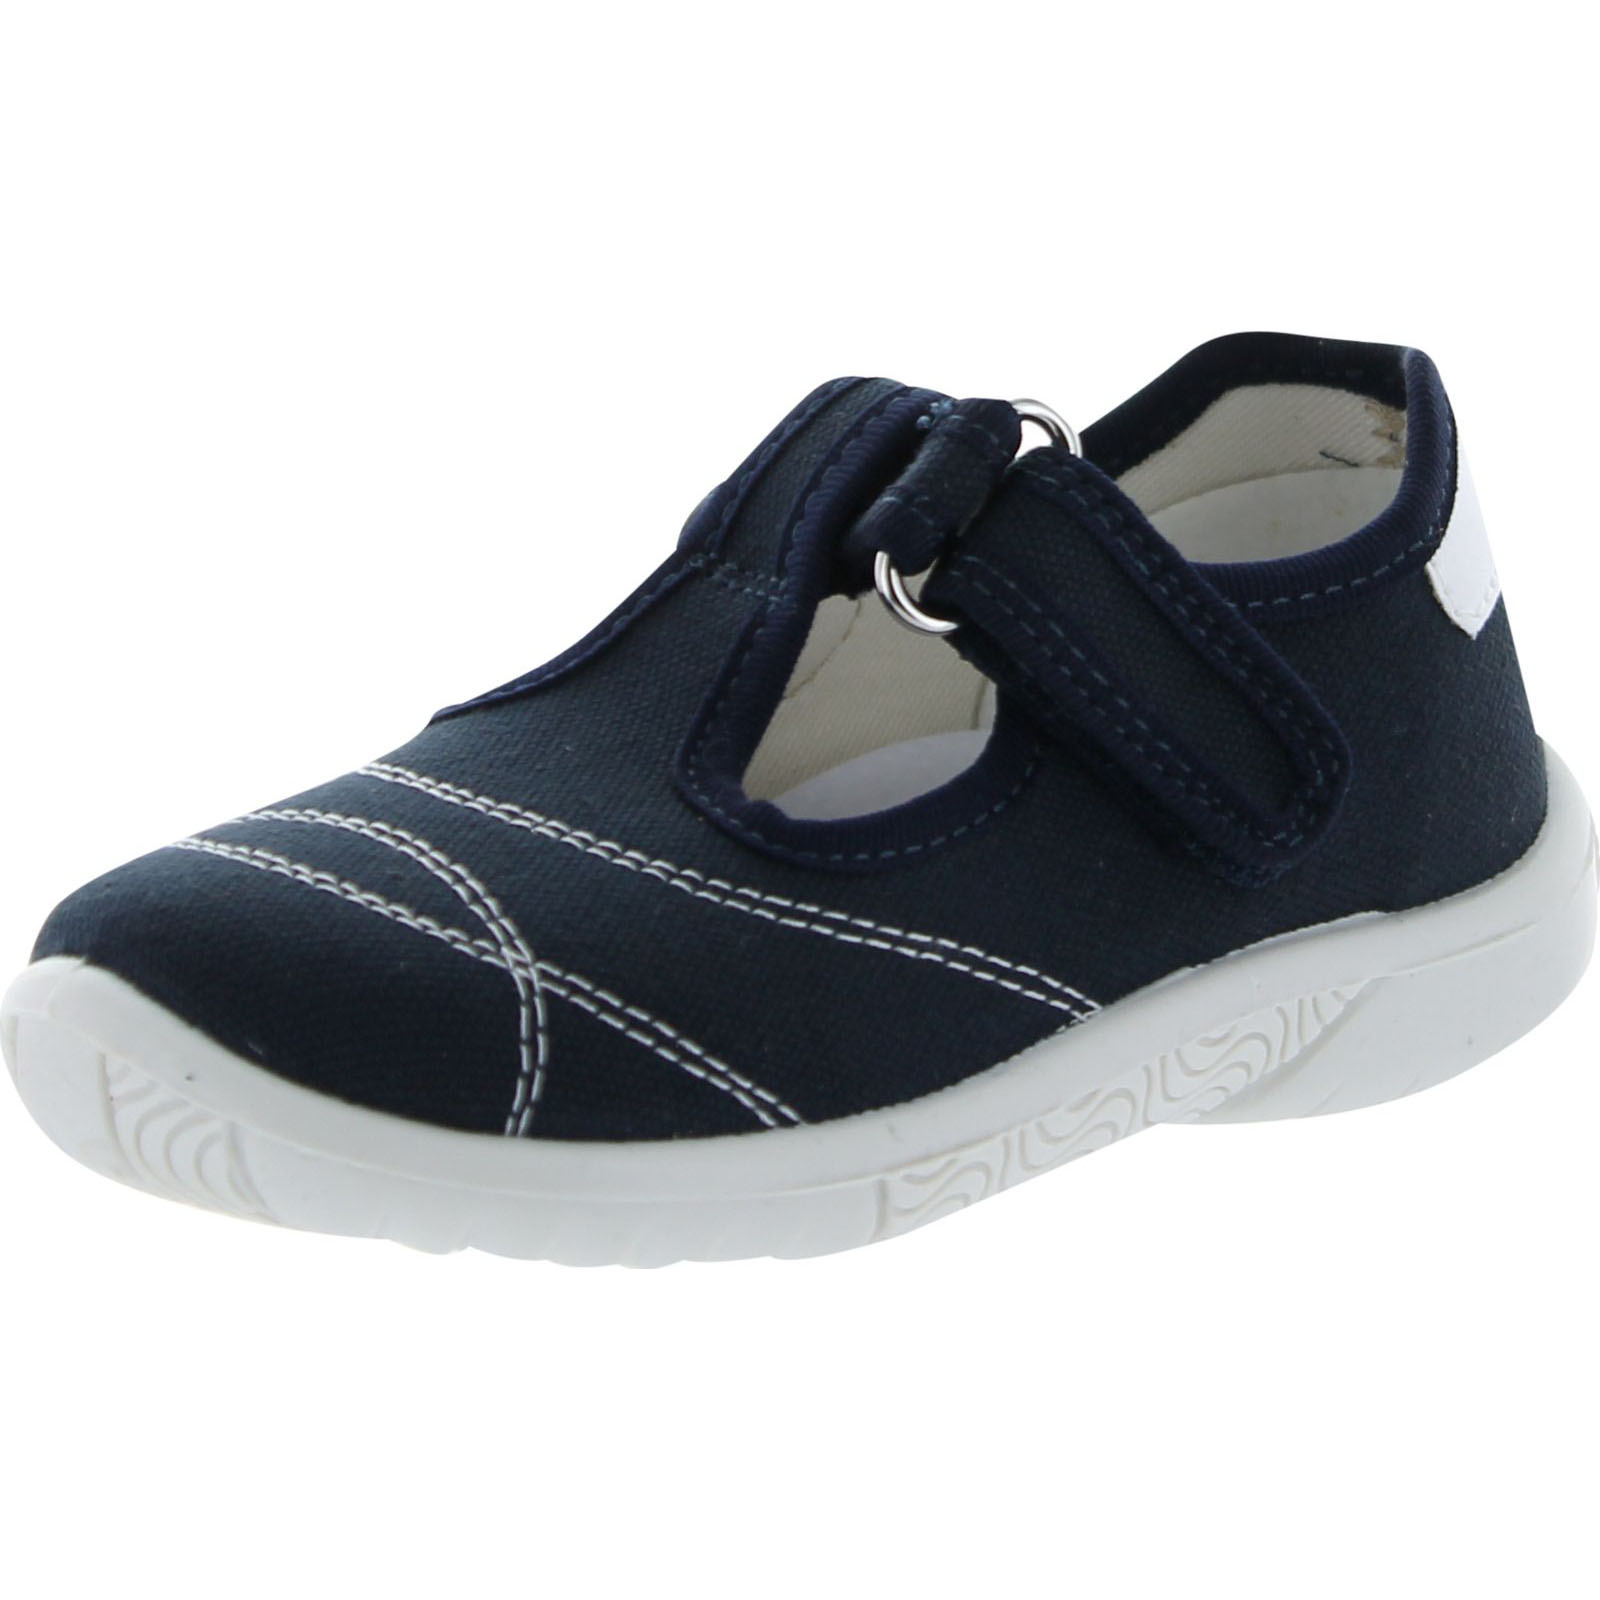 Naturino Boys 7742 Canvas T Strap Casual Shoes - image 1 of 4